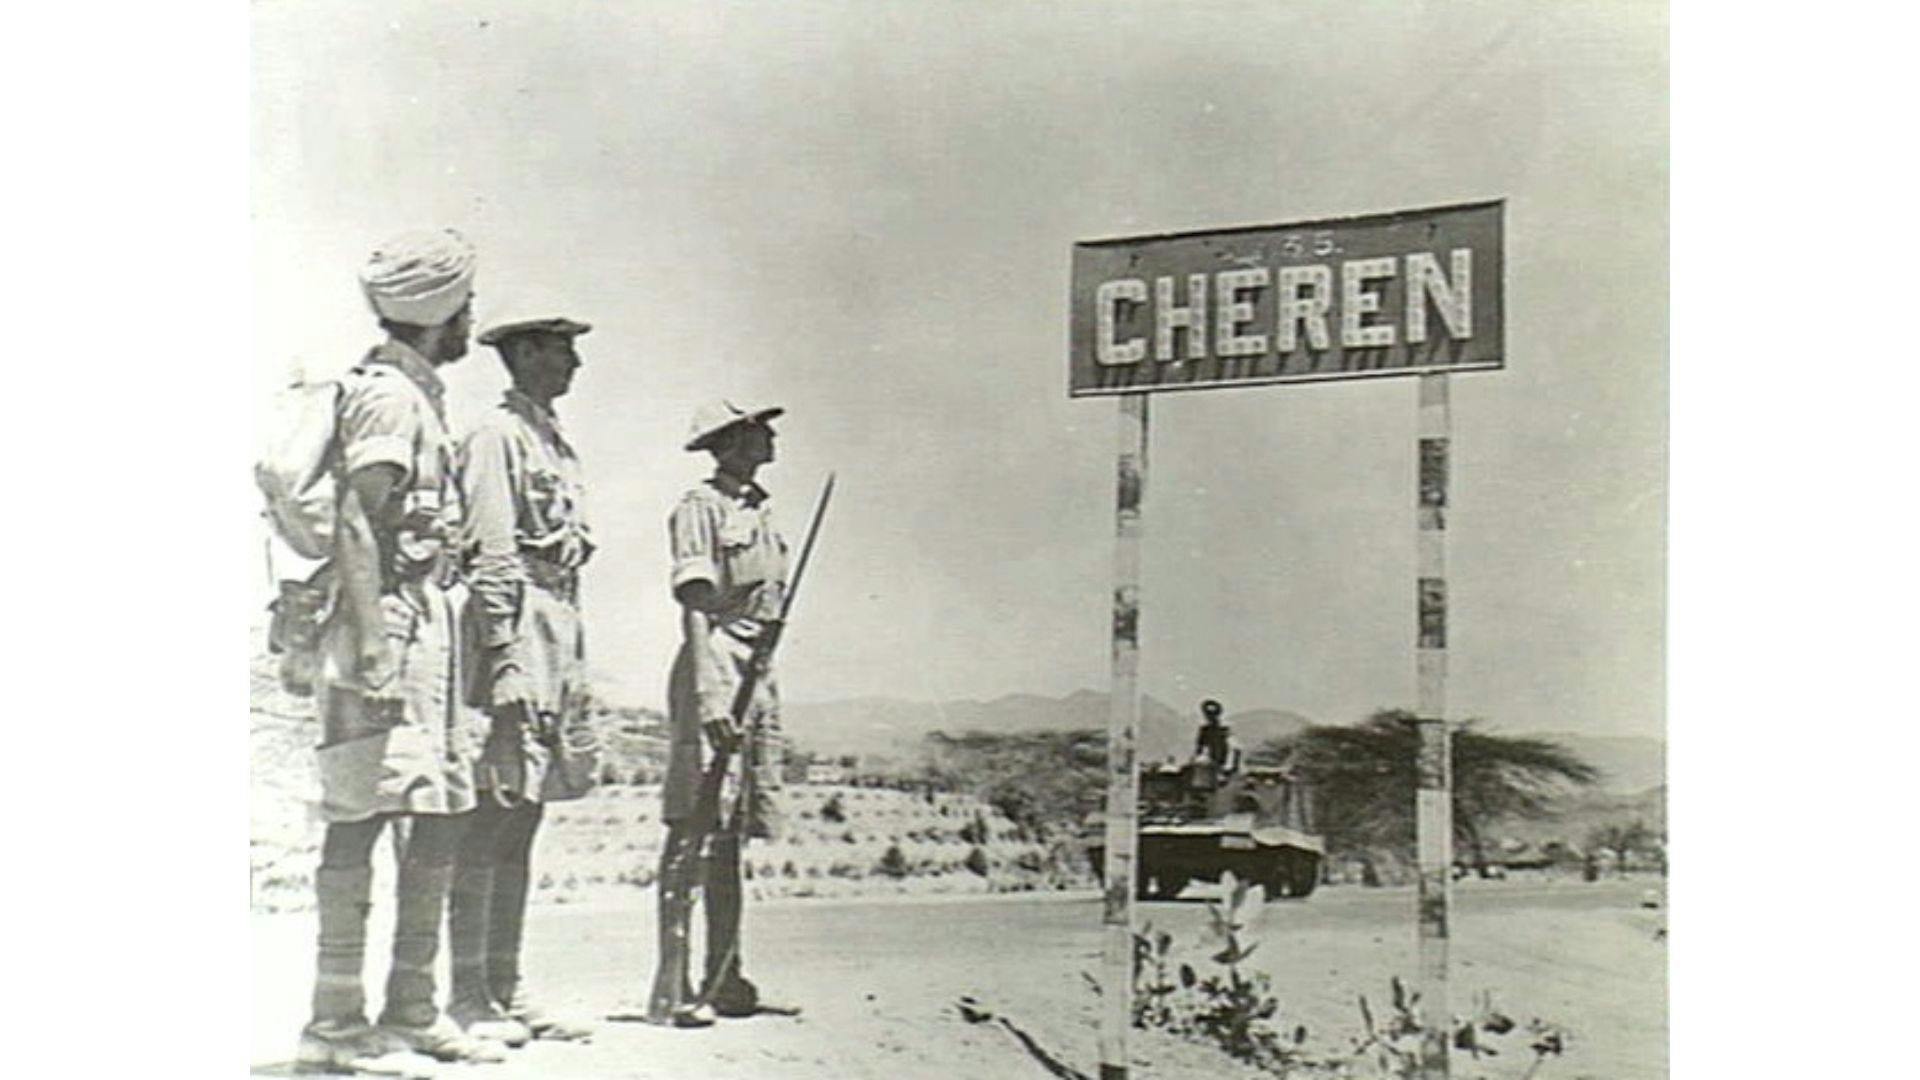 Indian Troops in Keren, in front of a sign board that spells the town as 'Cheren' | Wikimedia Commons